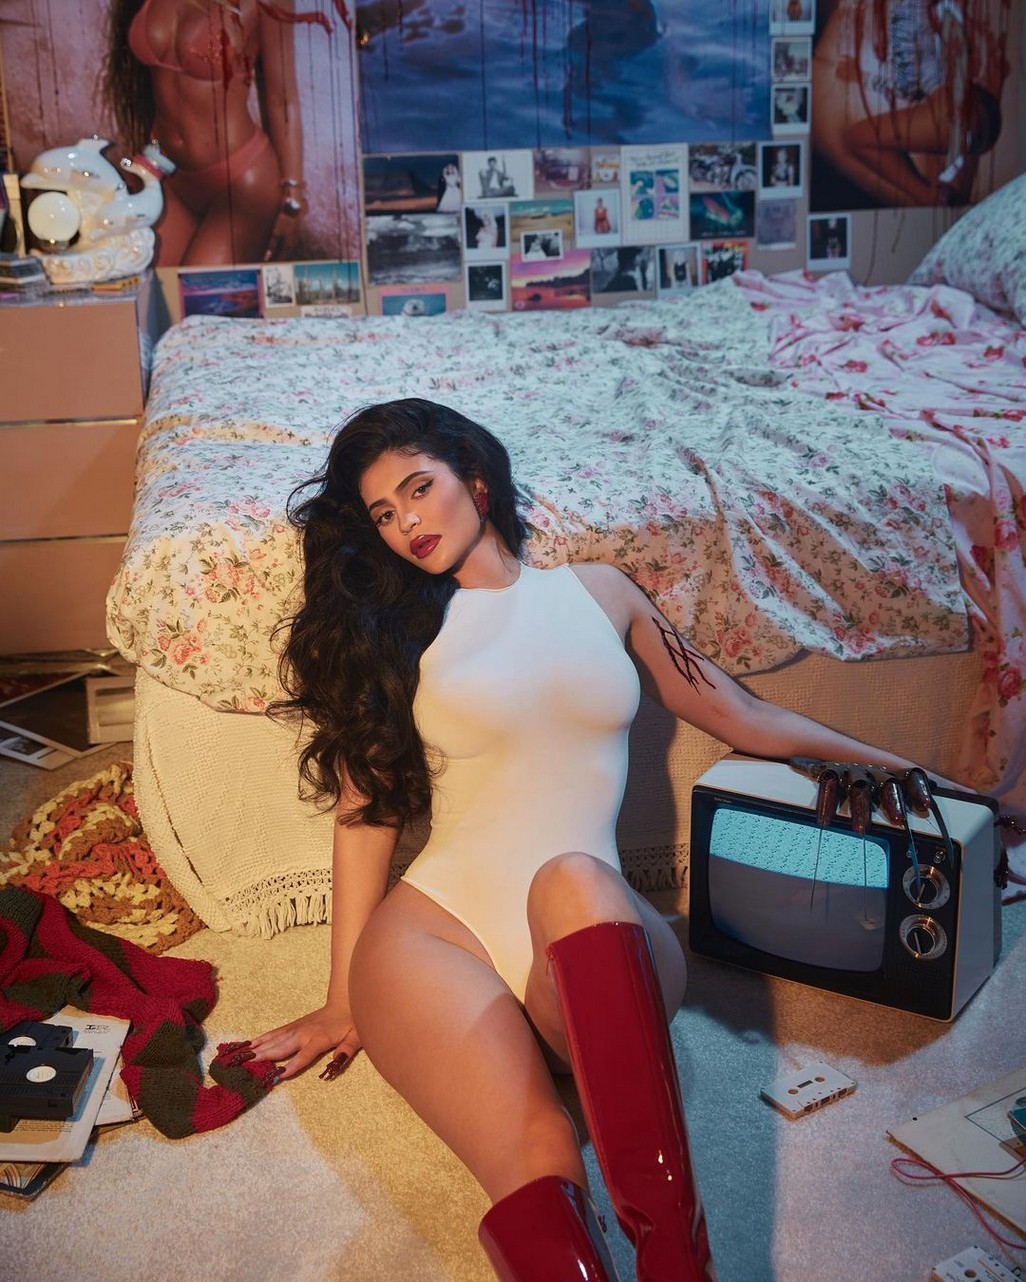 Kylie Jenner Sexy Freddy Girl TheFappening.Pro 3 - Kylie Jenner Sexy Freddy Girl (6 Photos)